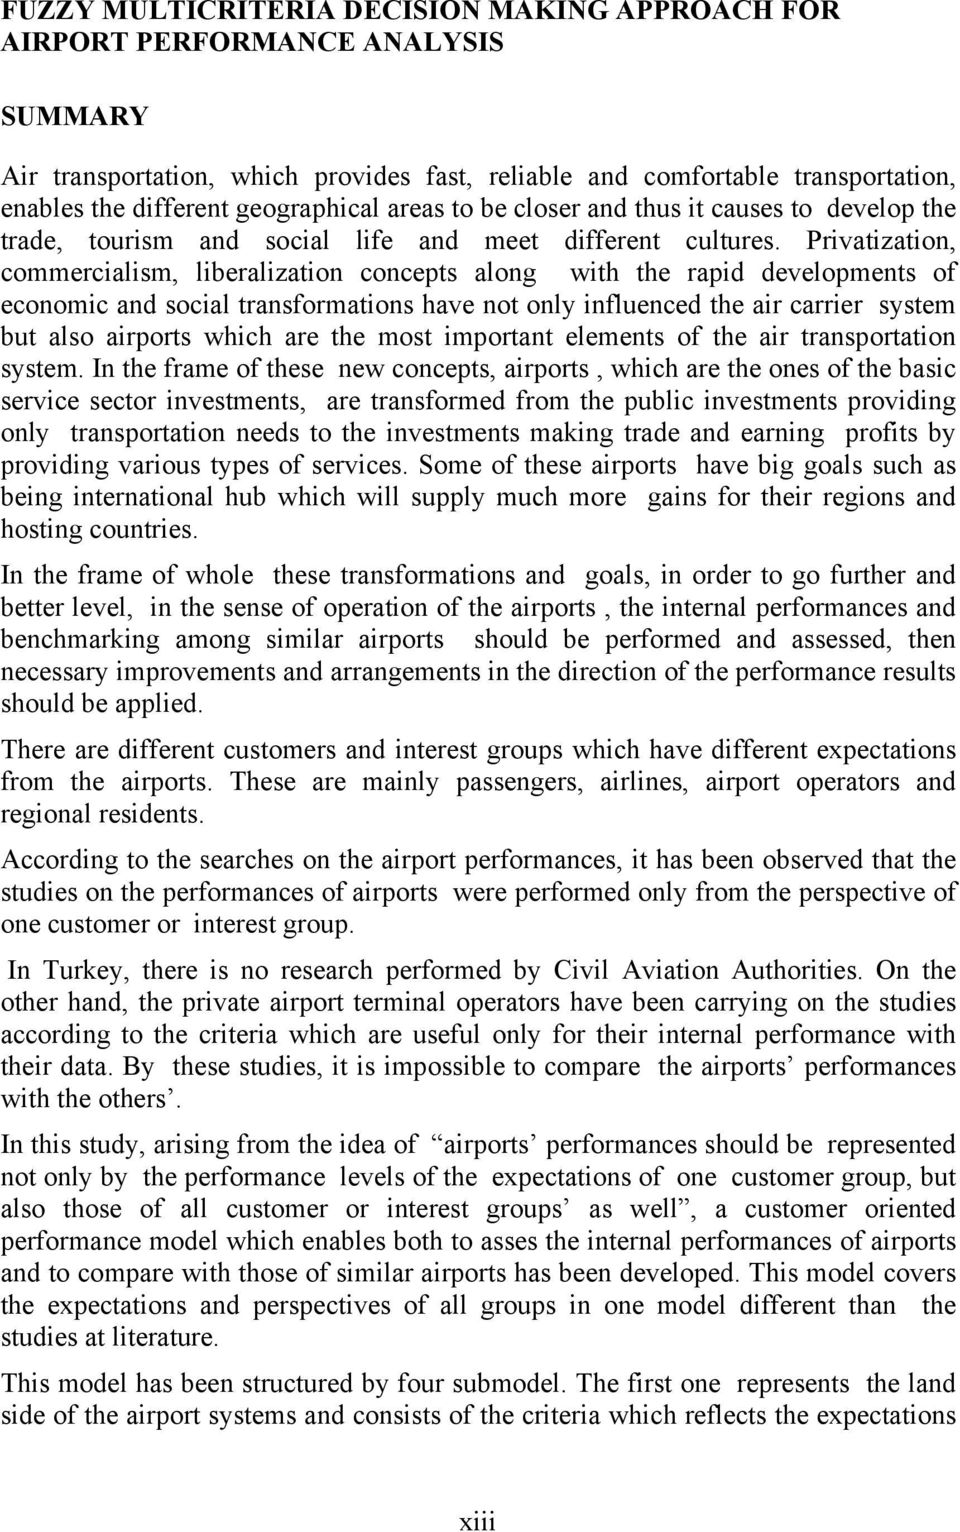 Privatization, commercialism, liberalization concepts along with the rapid developments of economic and social transformations have not only influenced the air carrier system but also airports which